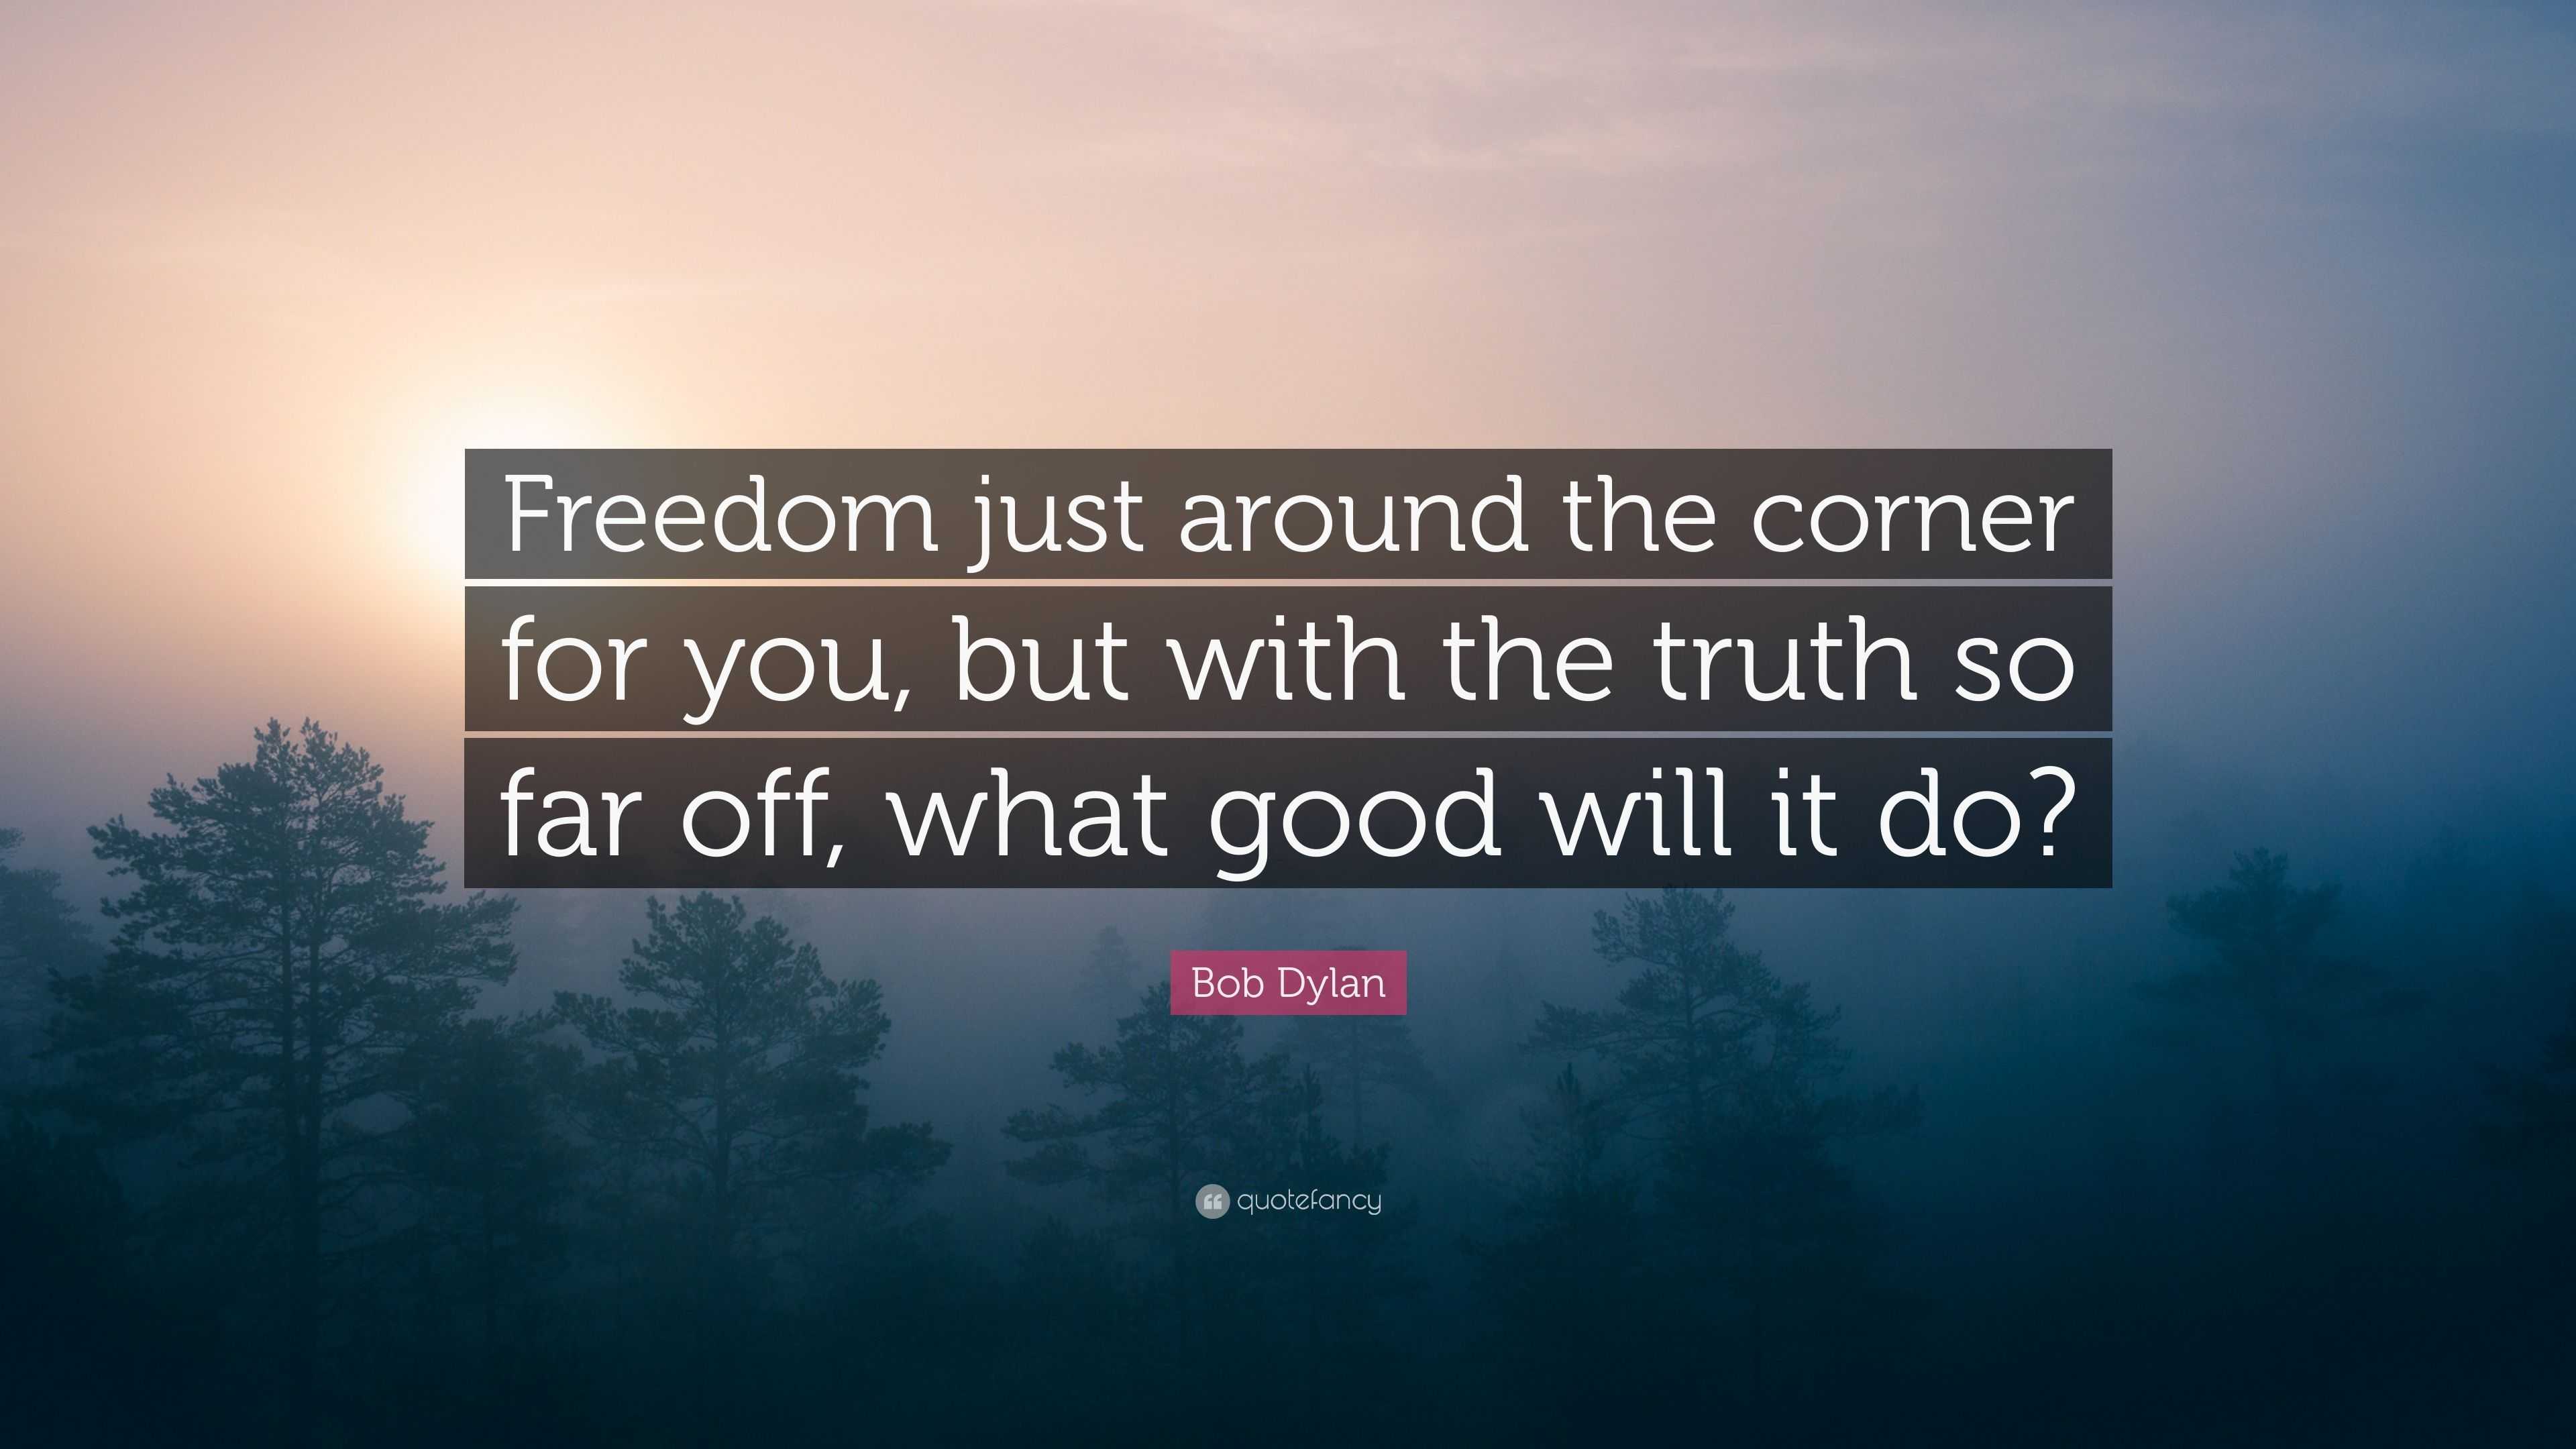 Bob Dylan Quote: “Freedom just around the corner for you, but with the